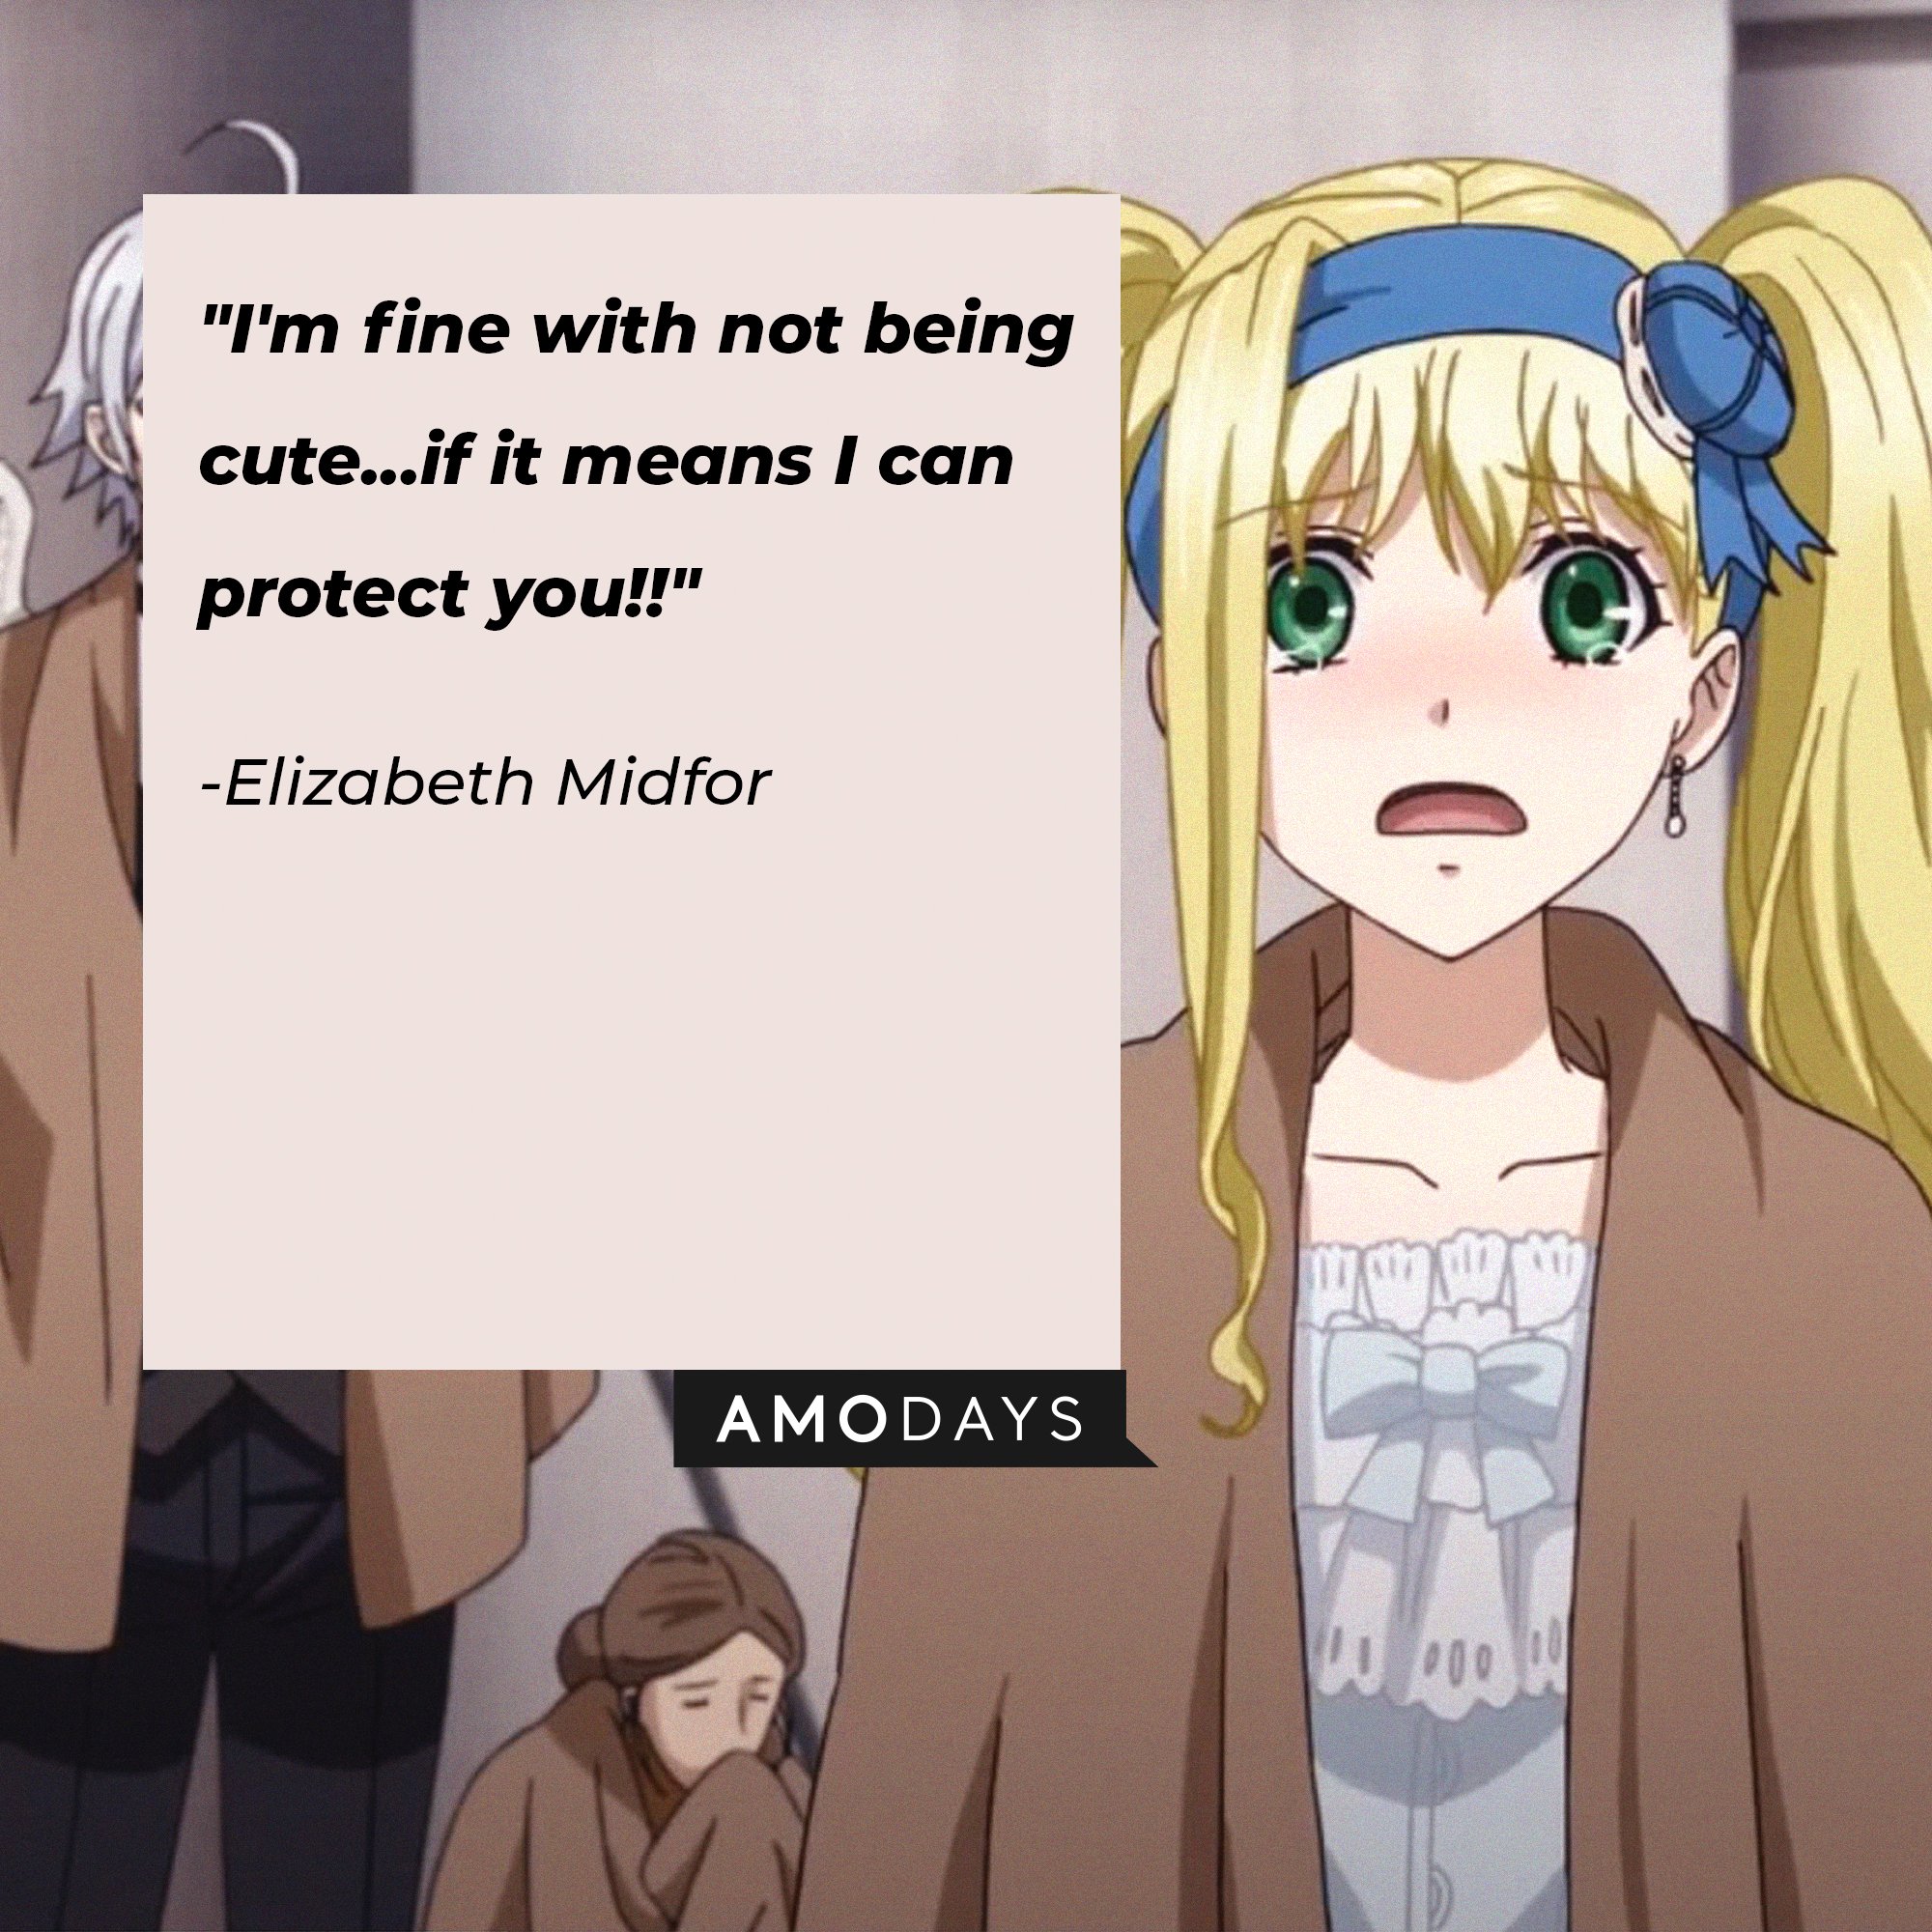 Elizabeth Midford’s quote: "I'm fine with not being cute...if it means I can protect you!!" | Image: AmoDays